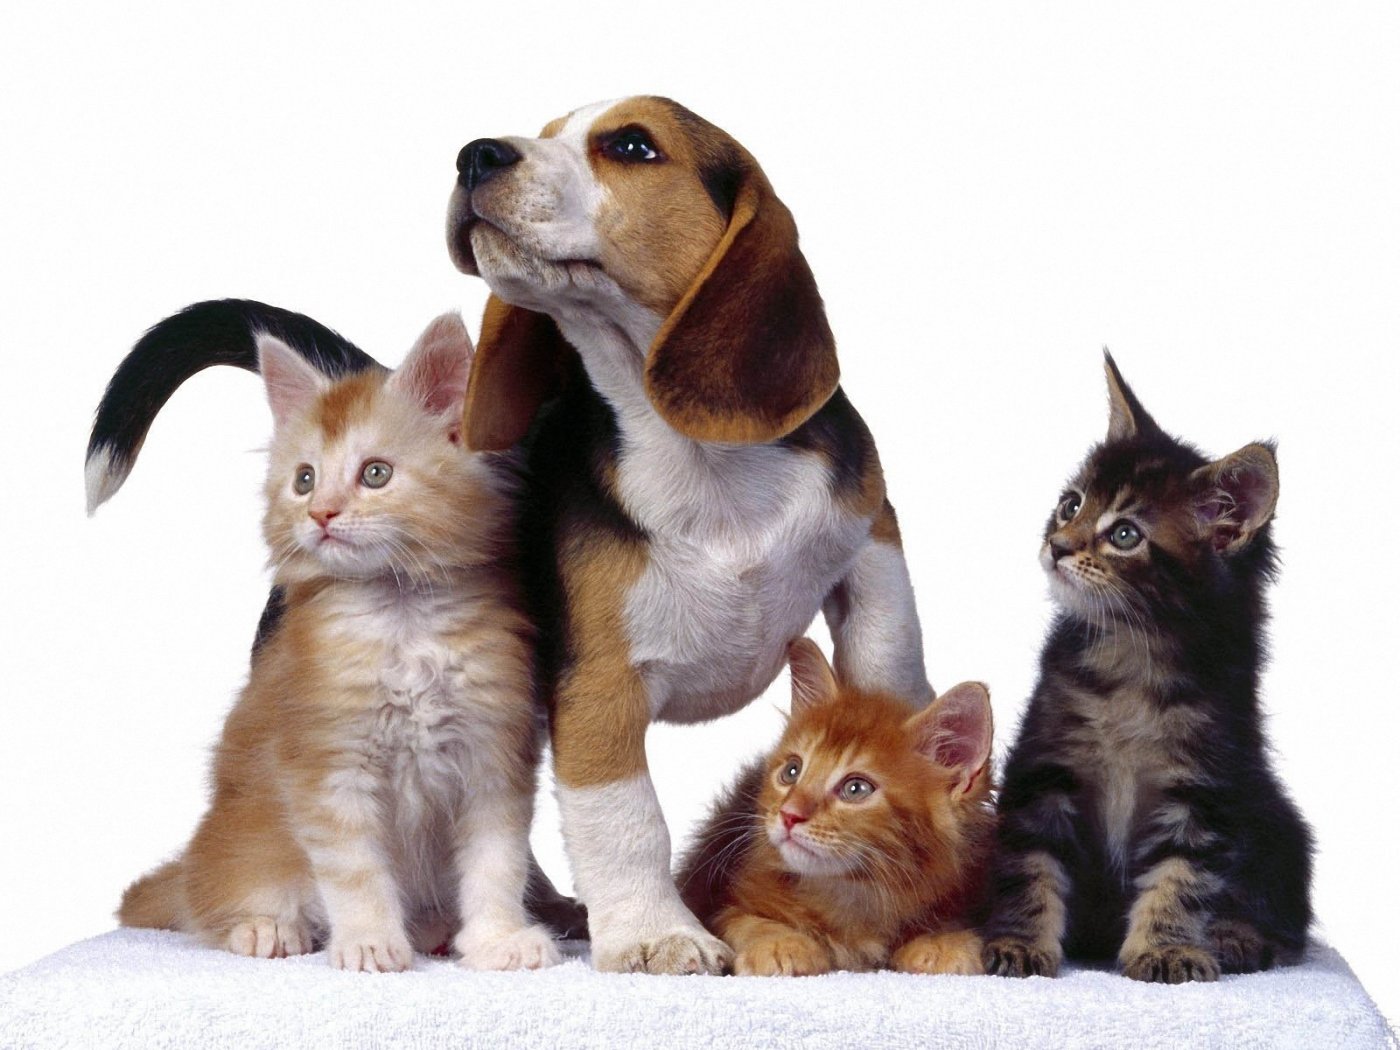 Desktop Cat And Dog Wallpapers Download - 3 Cats And 1 Dog - 1400x1050  Wallpaper 